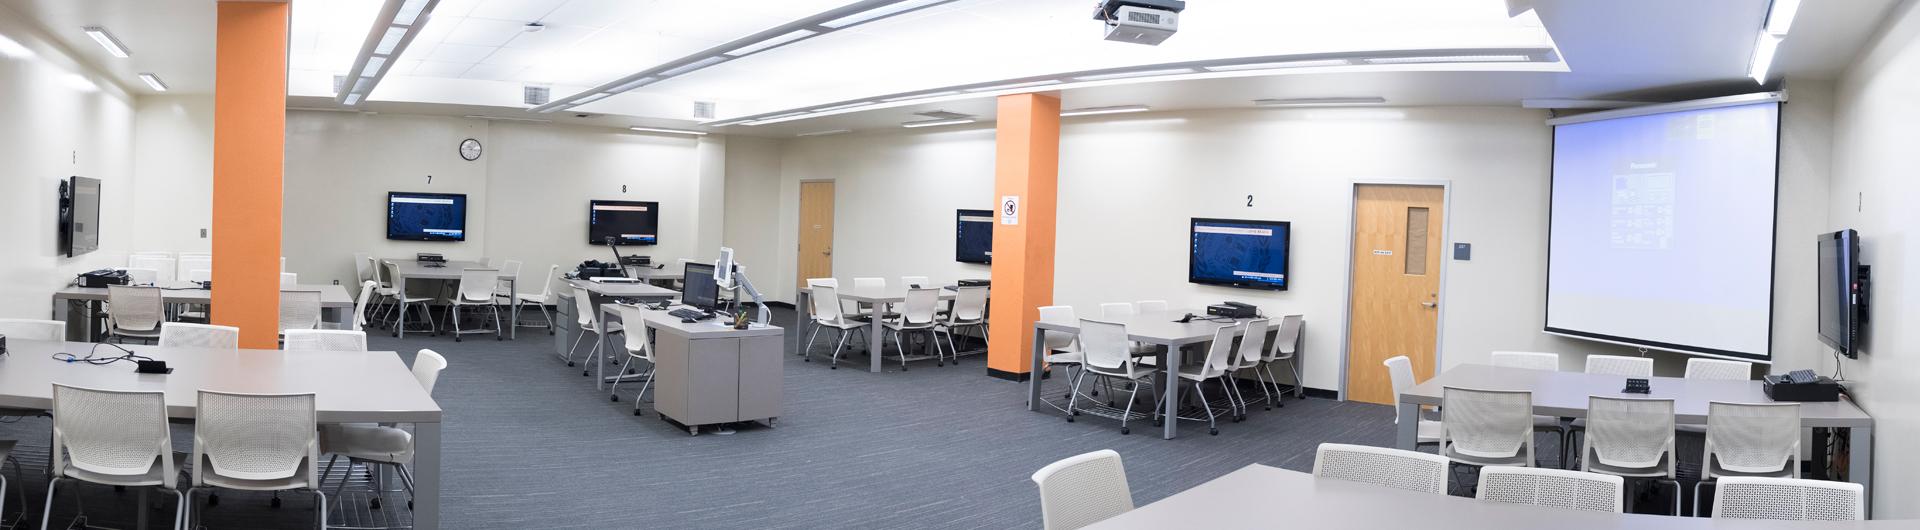 Active Learning Classroom AS 244